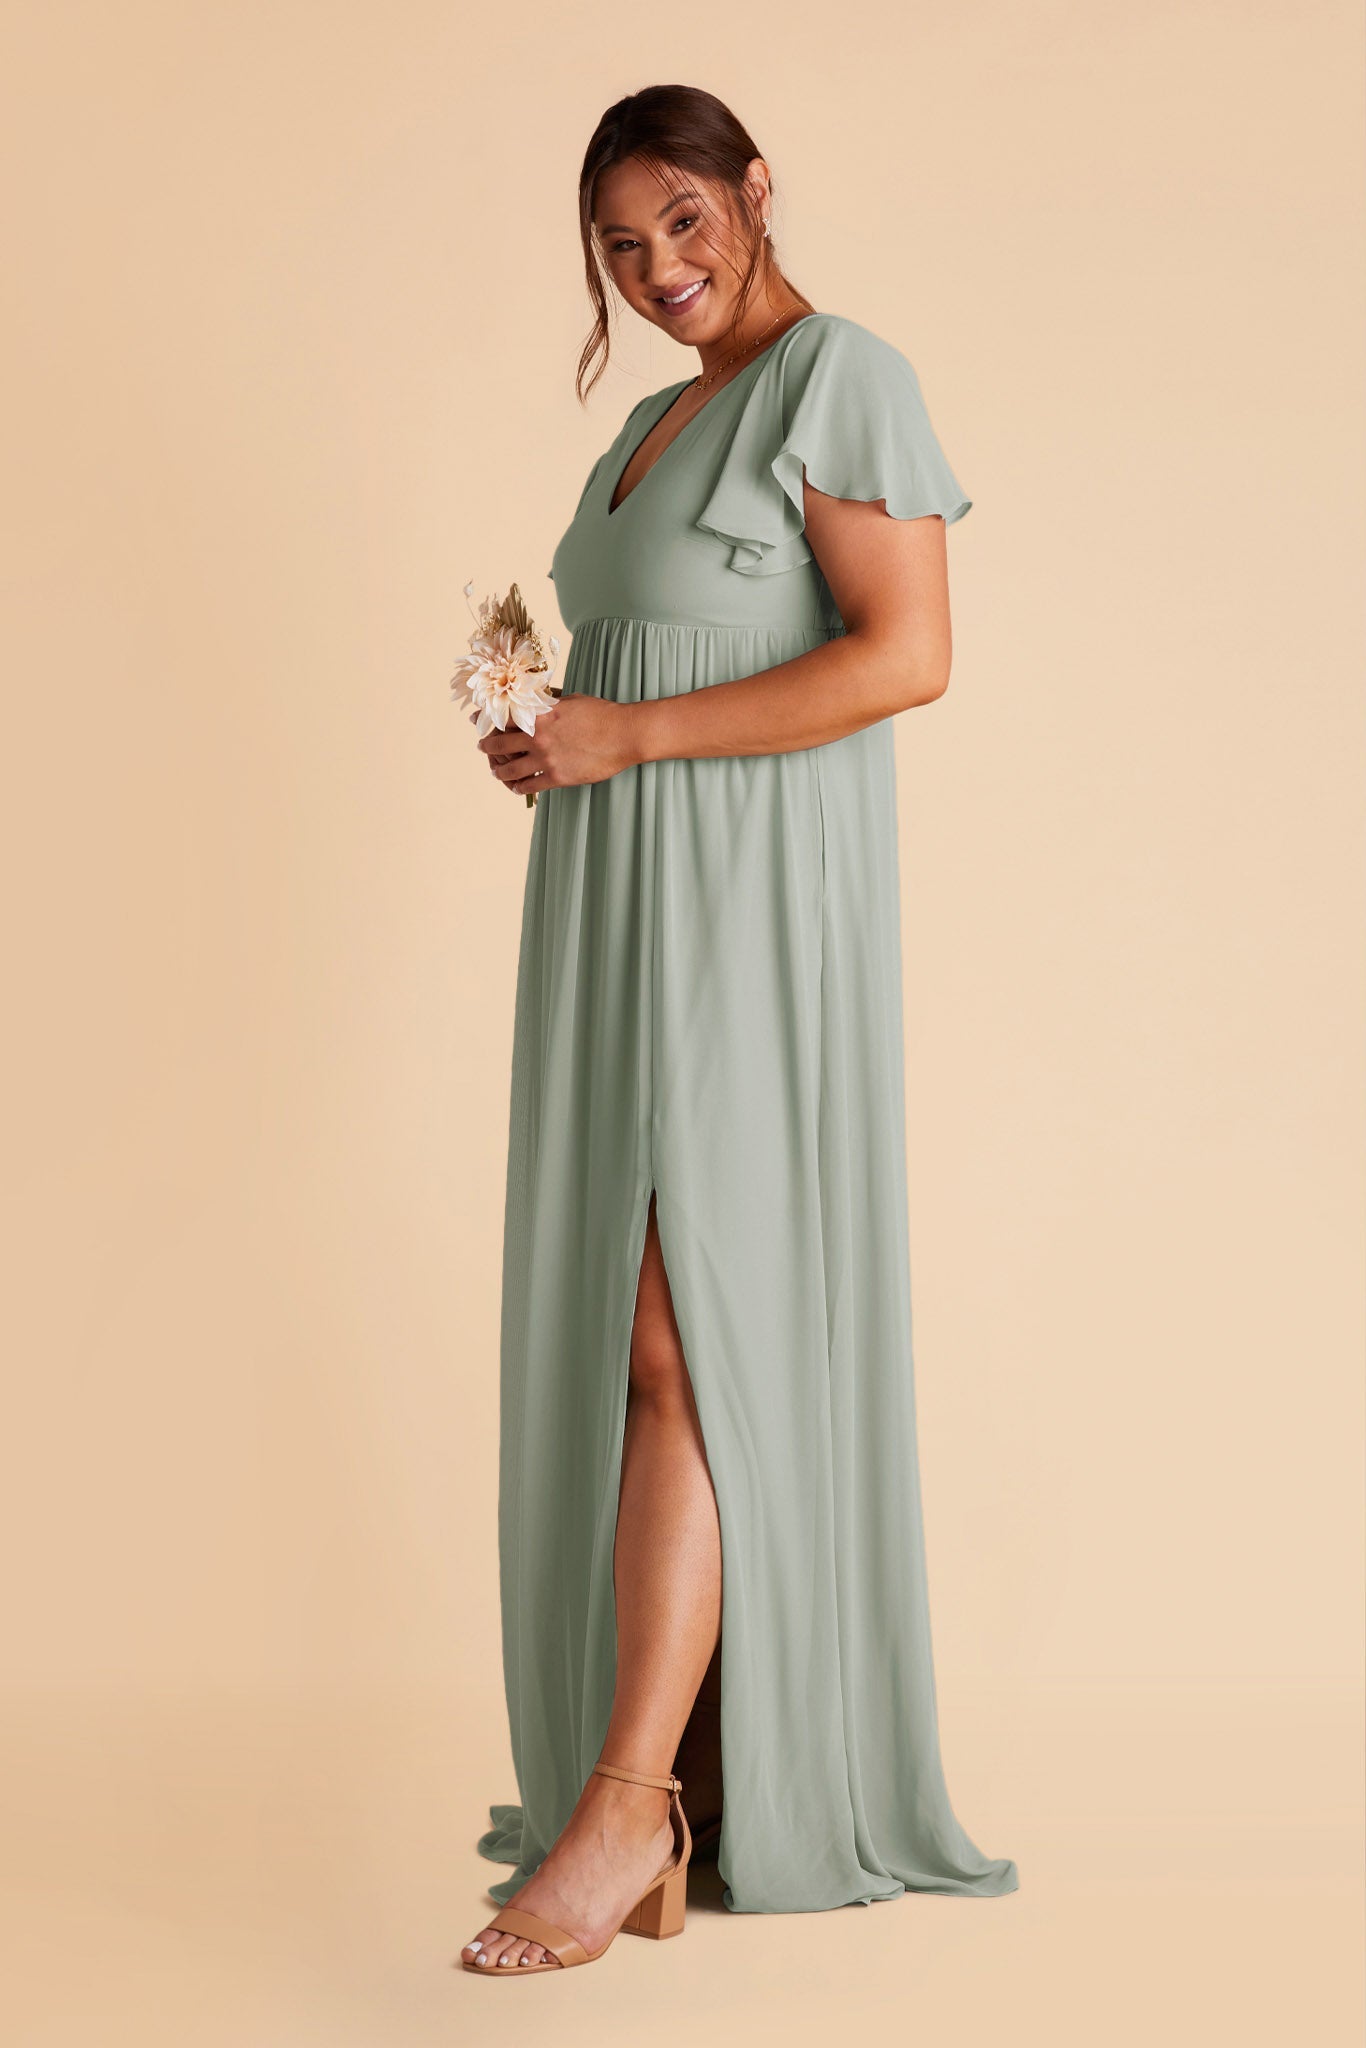 Hannah empire plus size bridesmaid dress in sage green chiffon by Birdy Grey, side view